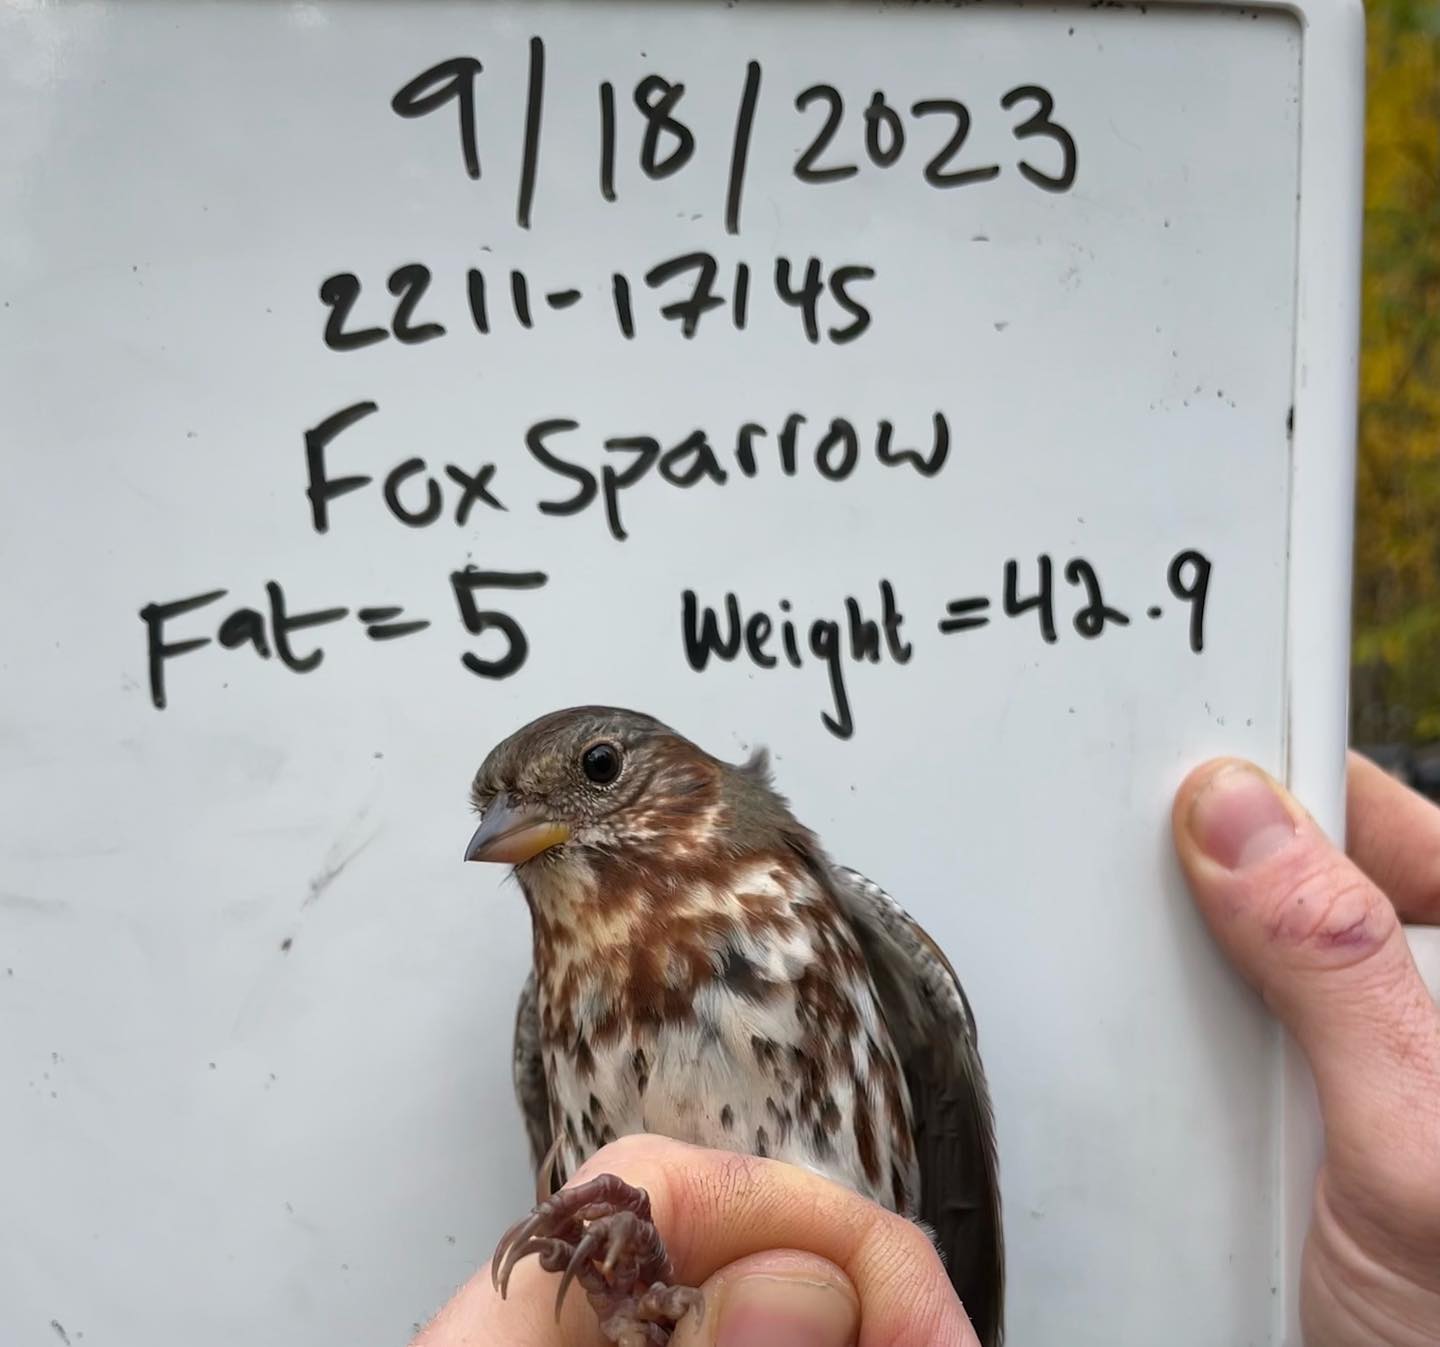 A brown and white bird sits on a person's hand. In the background, data about the bird is written on a whiteboard.